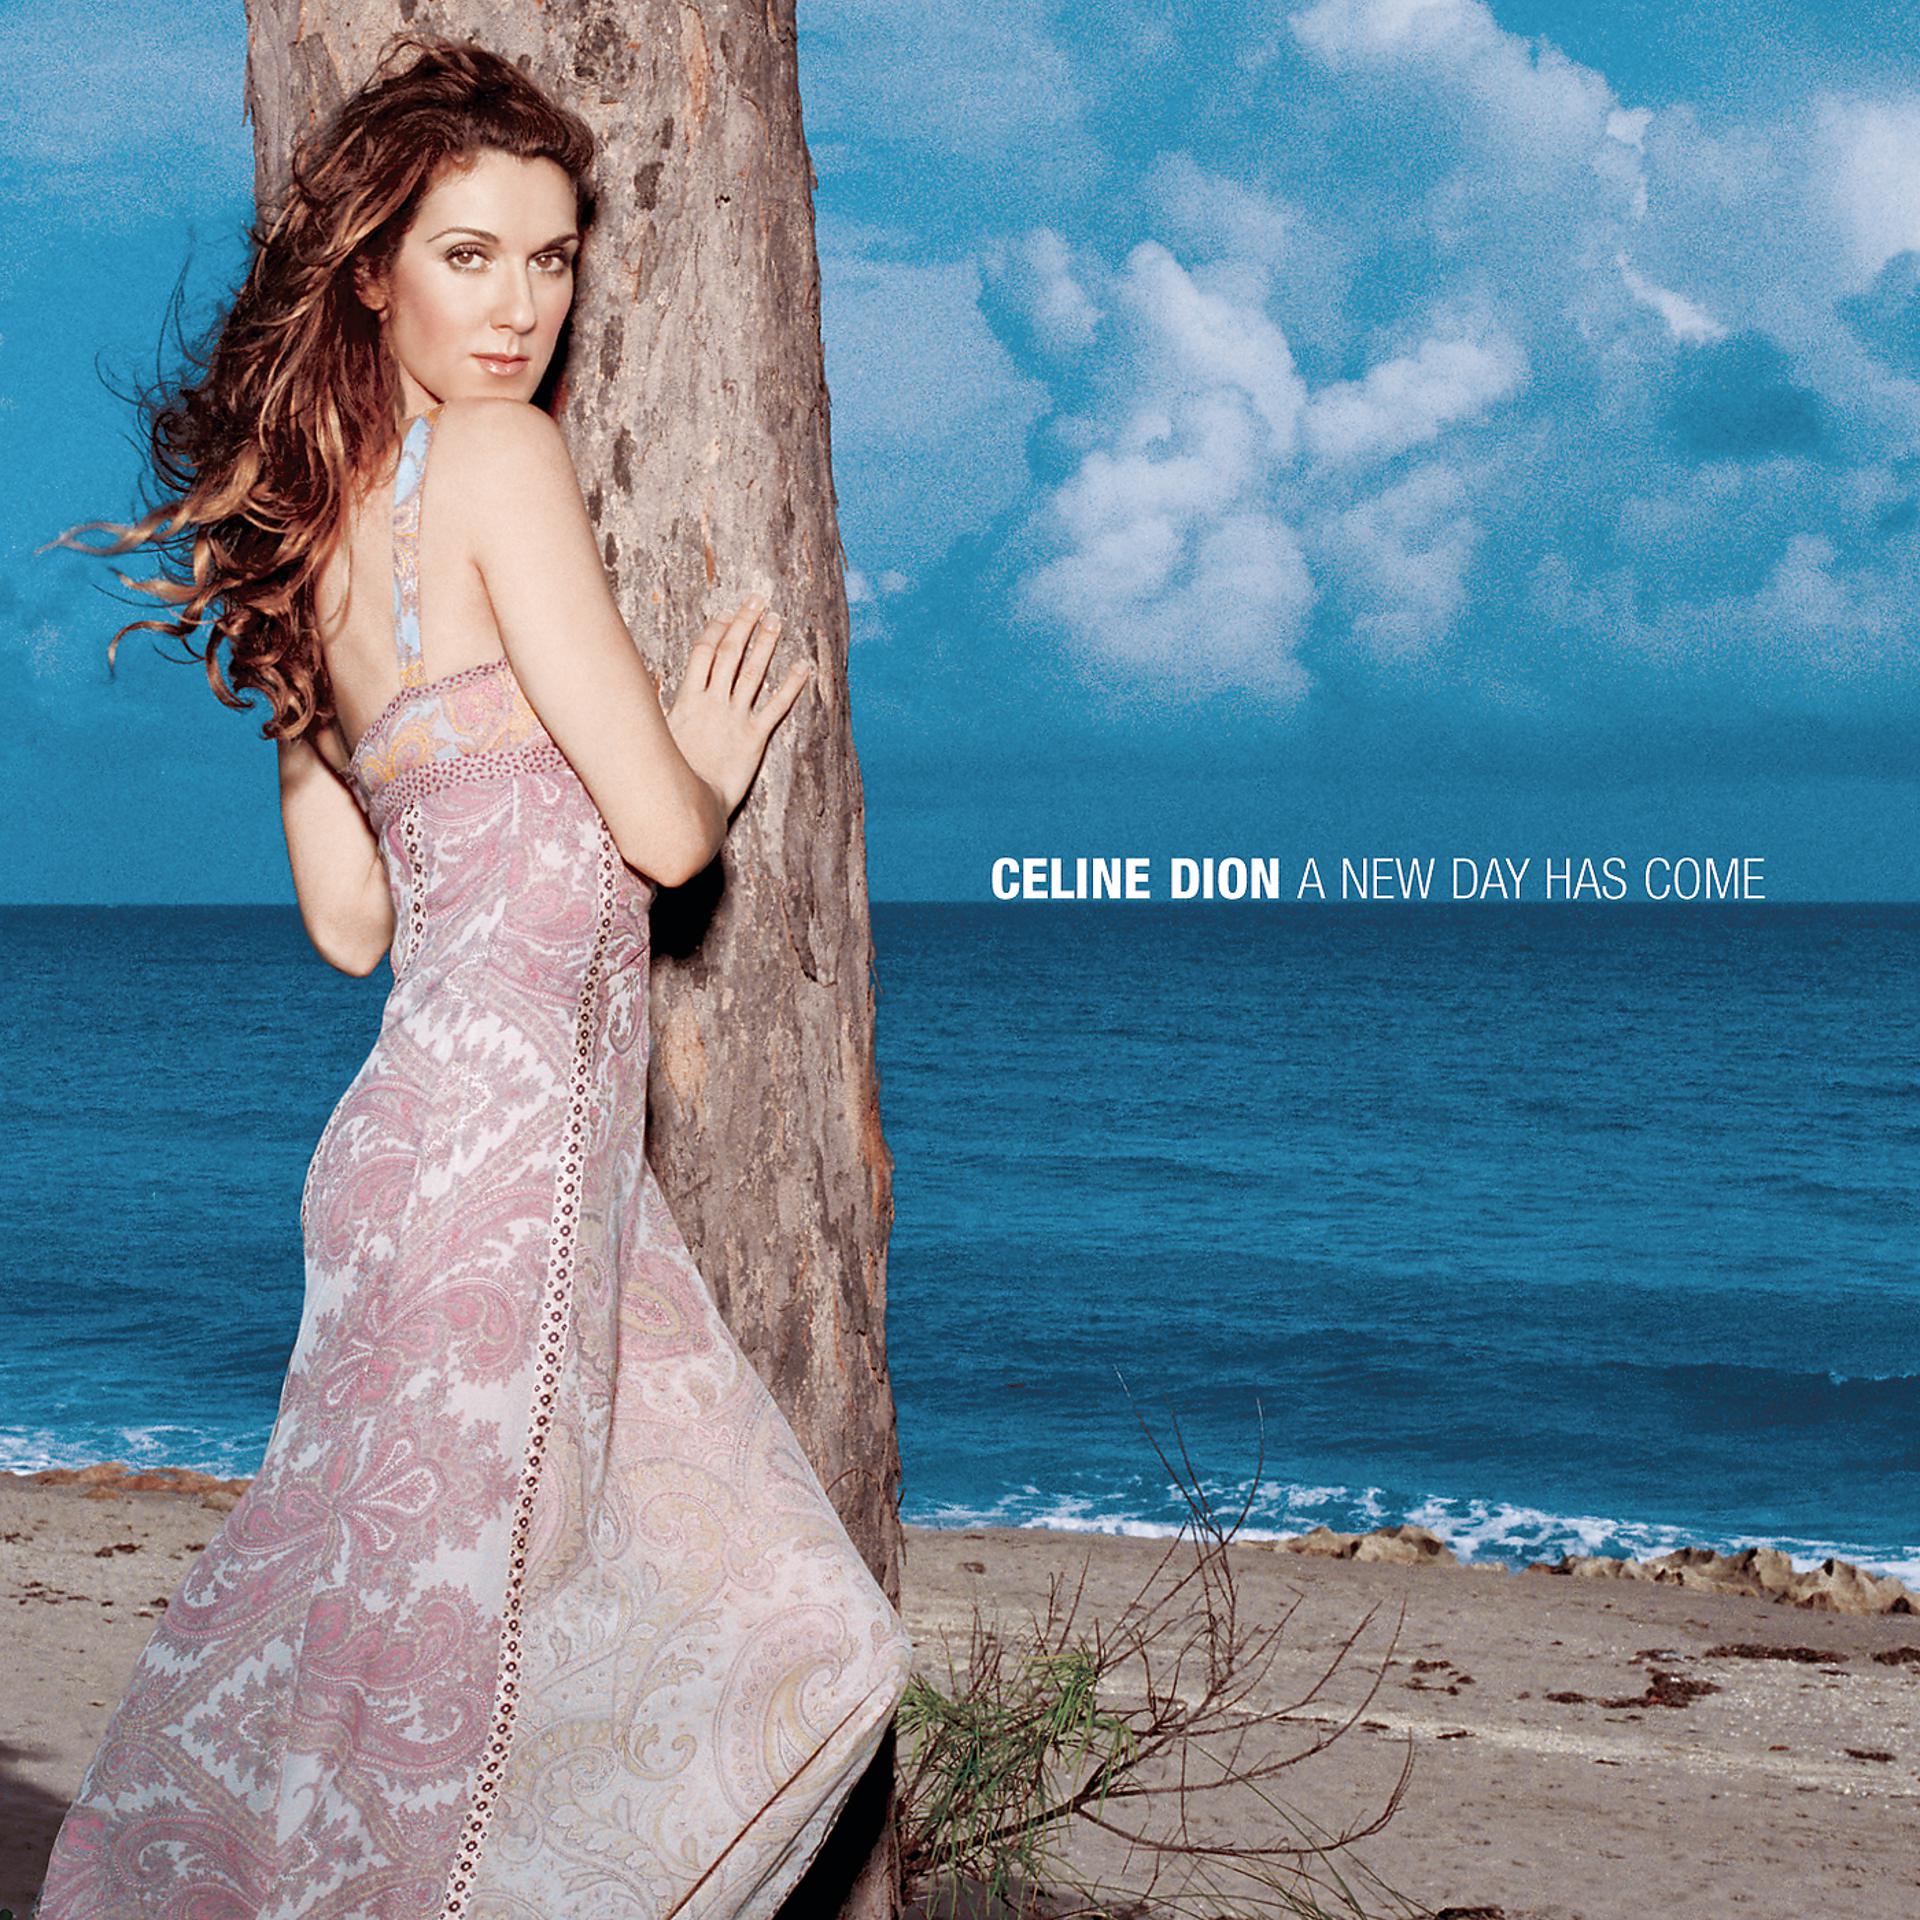 Celine dion new day have. Celine Dion 2002 a New Day has come. A New Day has come Céline Dion album. A New Day has come Céline Dion album Cover. Céline Dion - a New Day has come (2002).